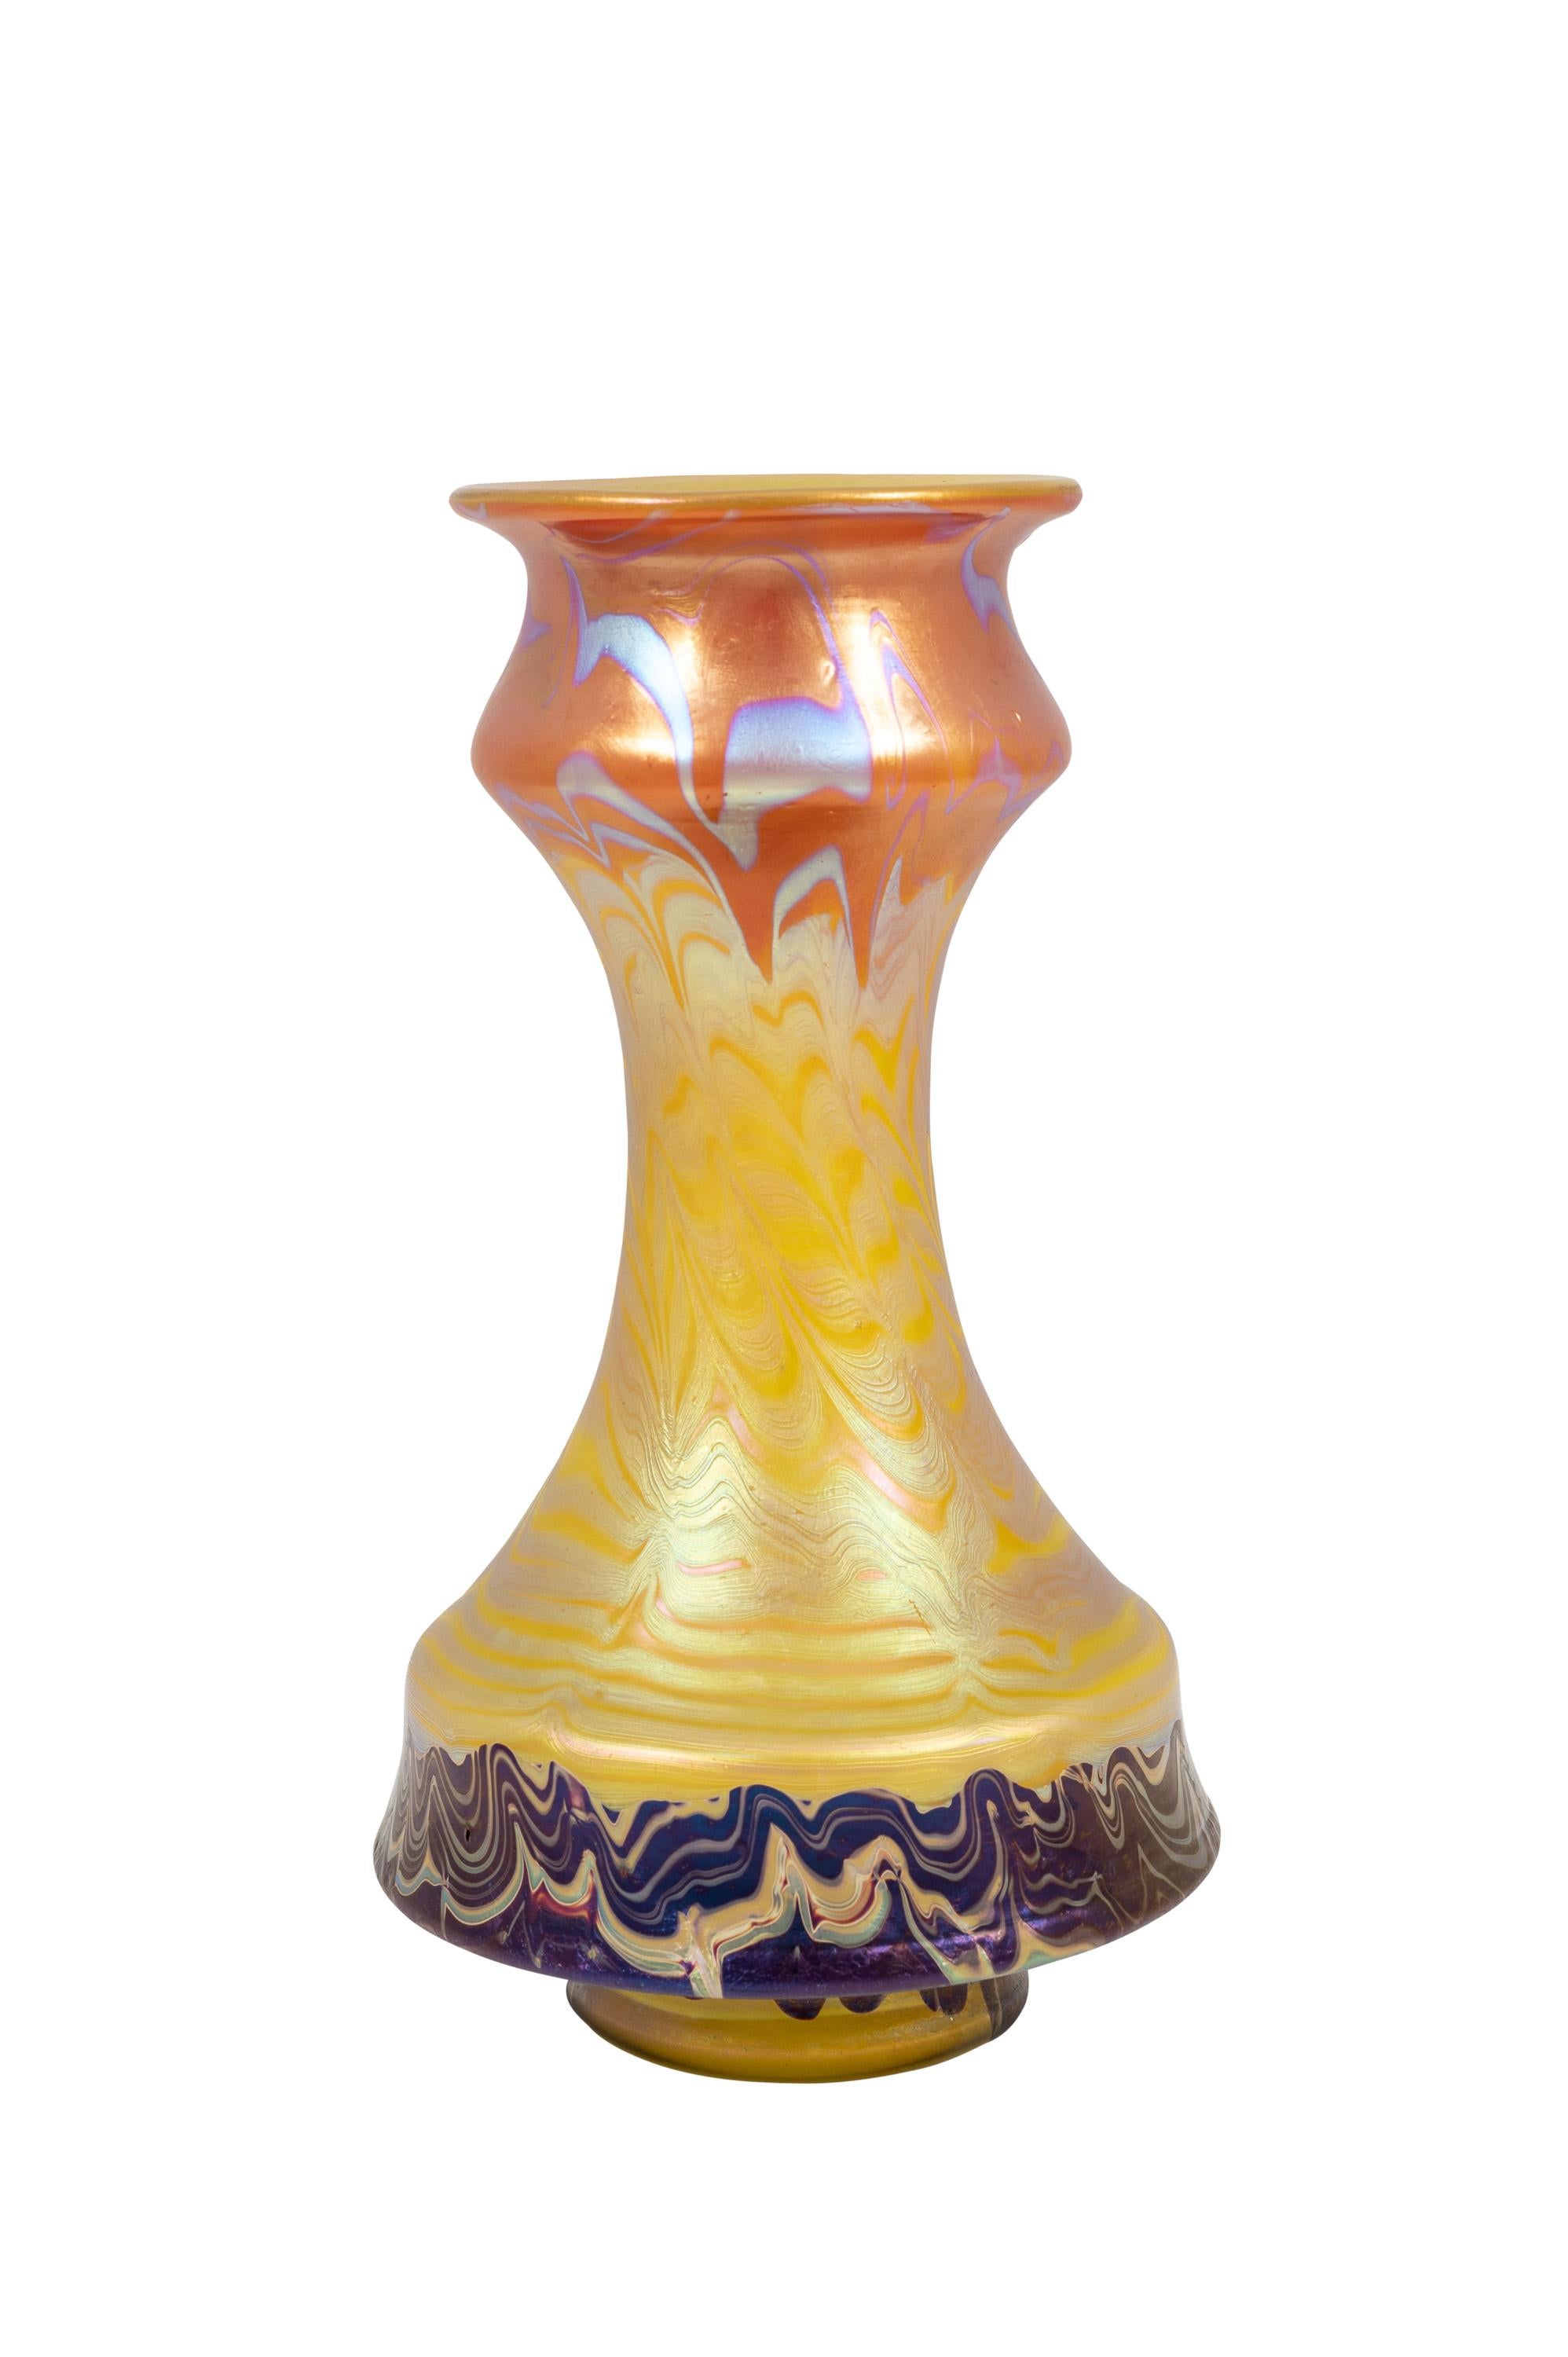 Austrian Jugendstil glass vase manufactured by Johann Loetz Witwe, Phenomen Genre 358 decoration, circa 1900

This glass vase is an extraordinary example of the Loetz manufactory its capability for design. The Phenomen Genre 358 decoration is known